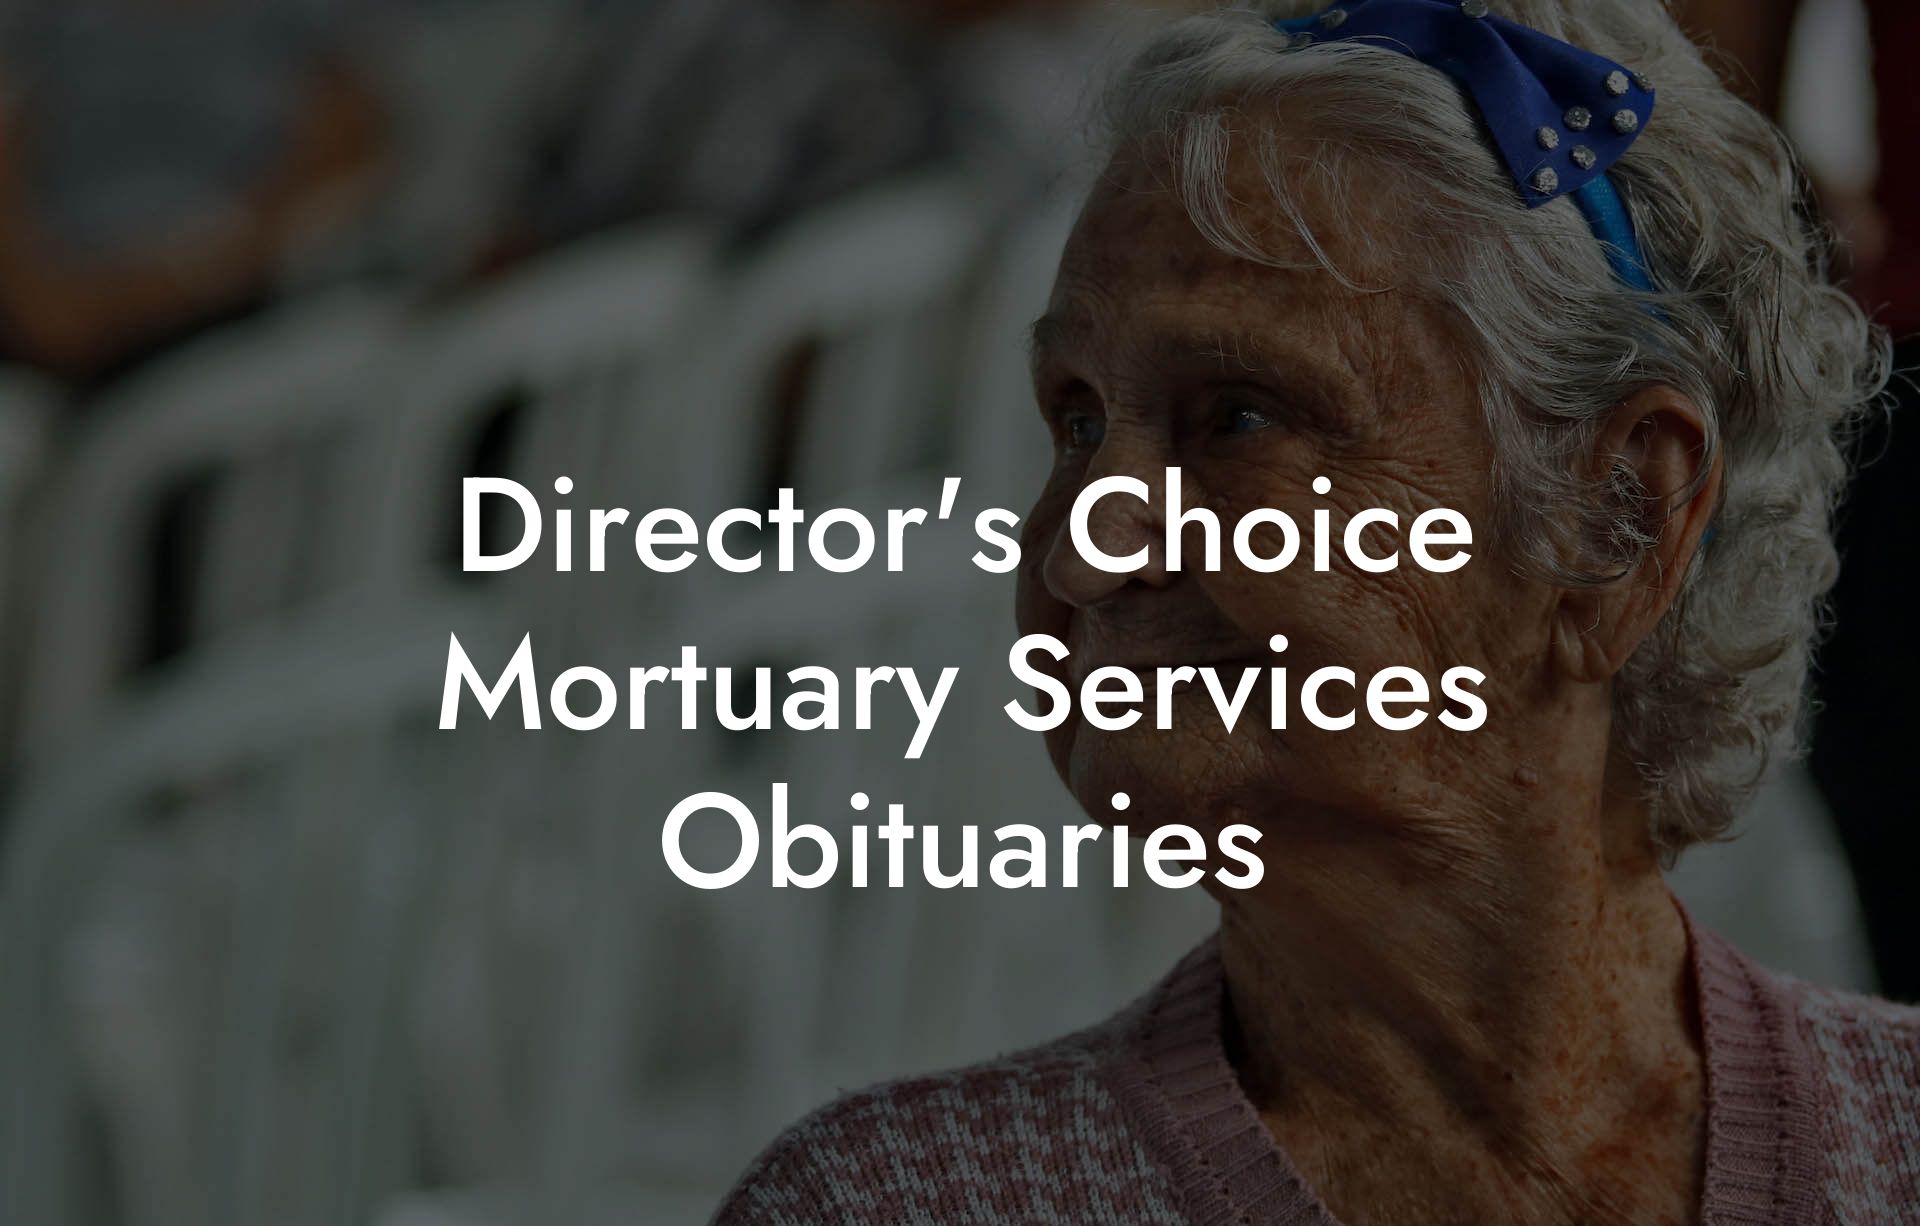 Director's Choice Mortuary Services Obituaries